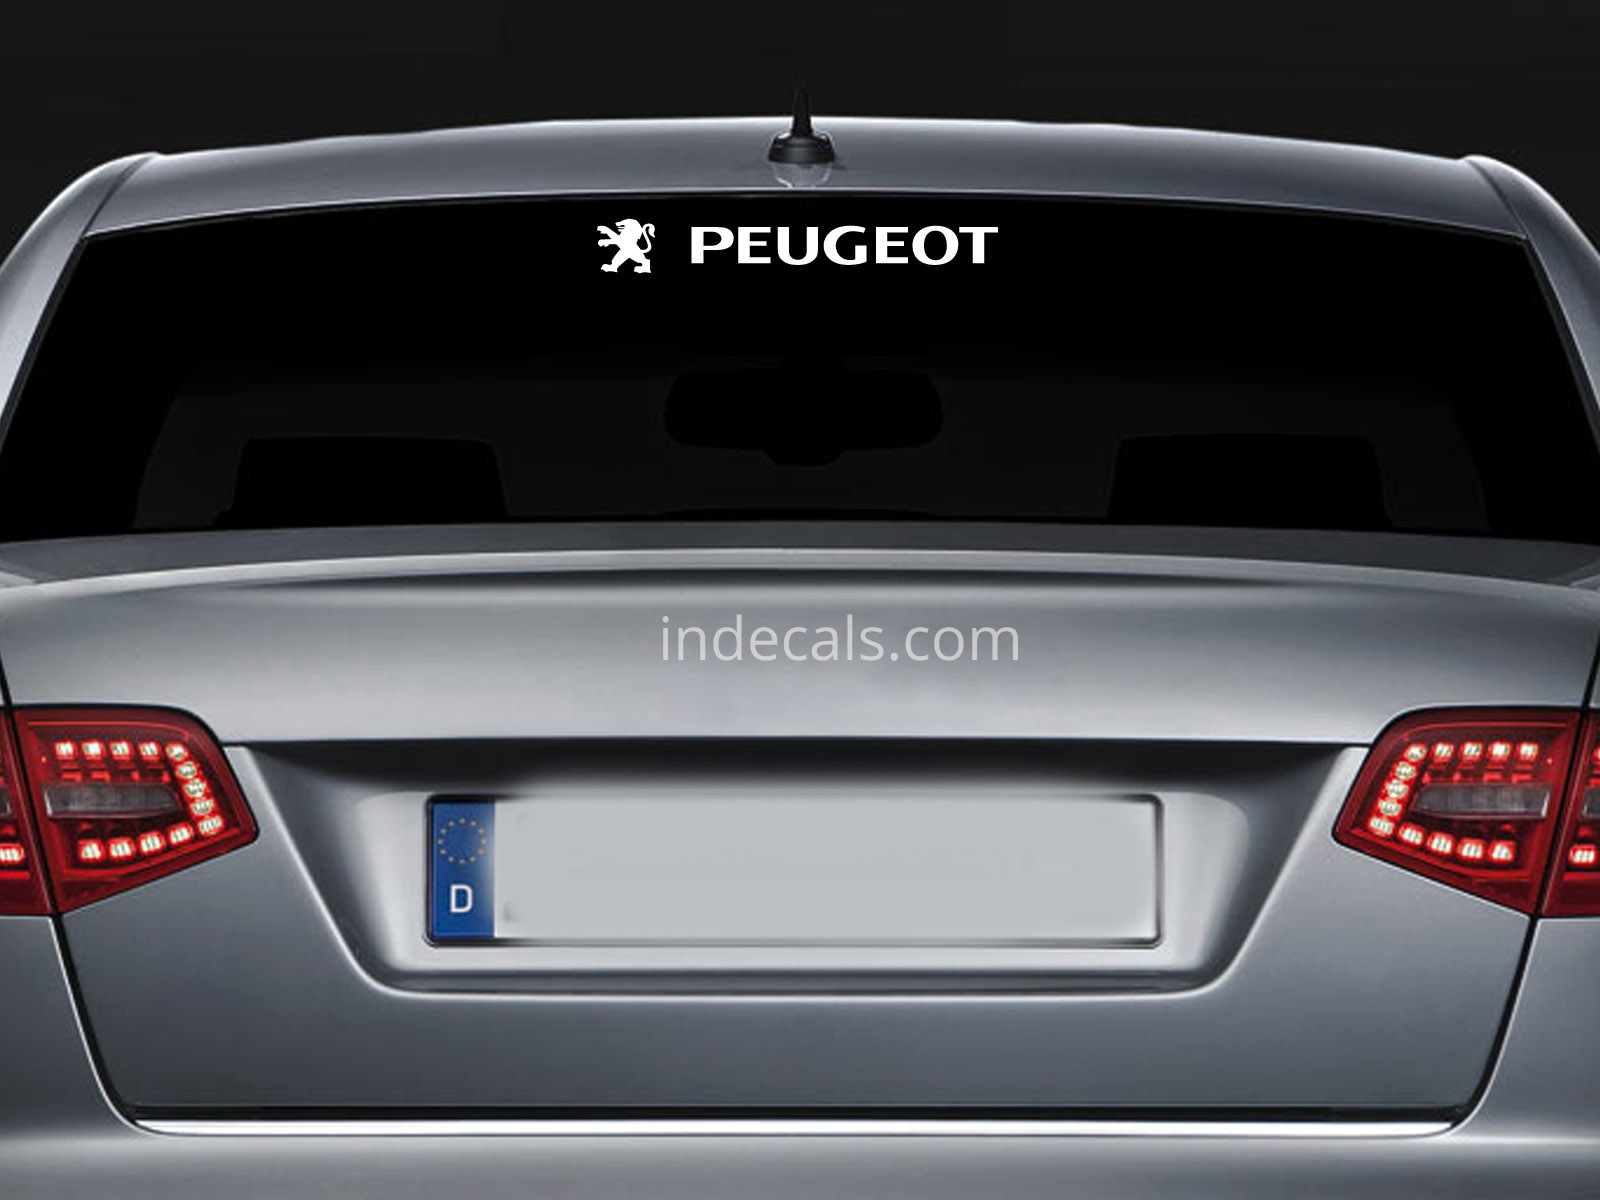 1 x Peugeot Sticker for Windshield or Back Window - White